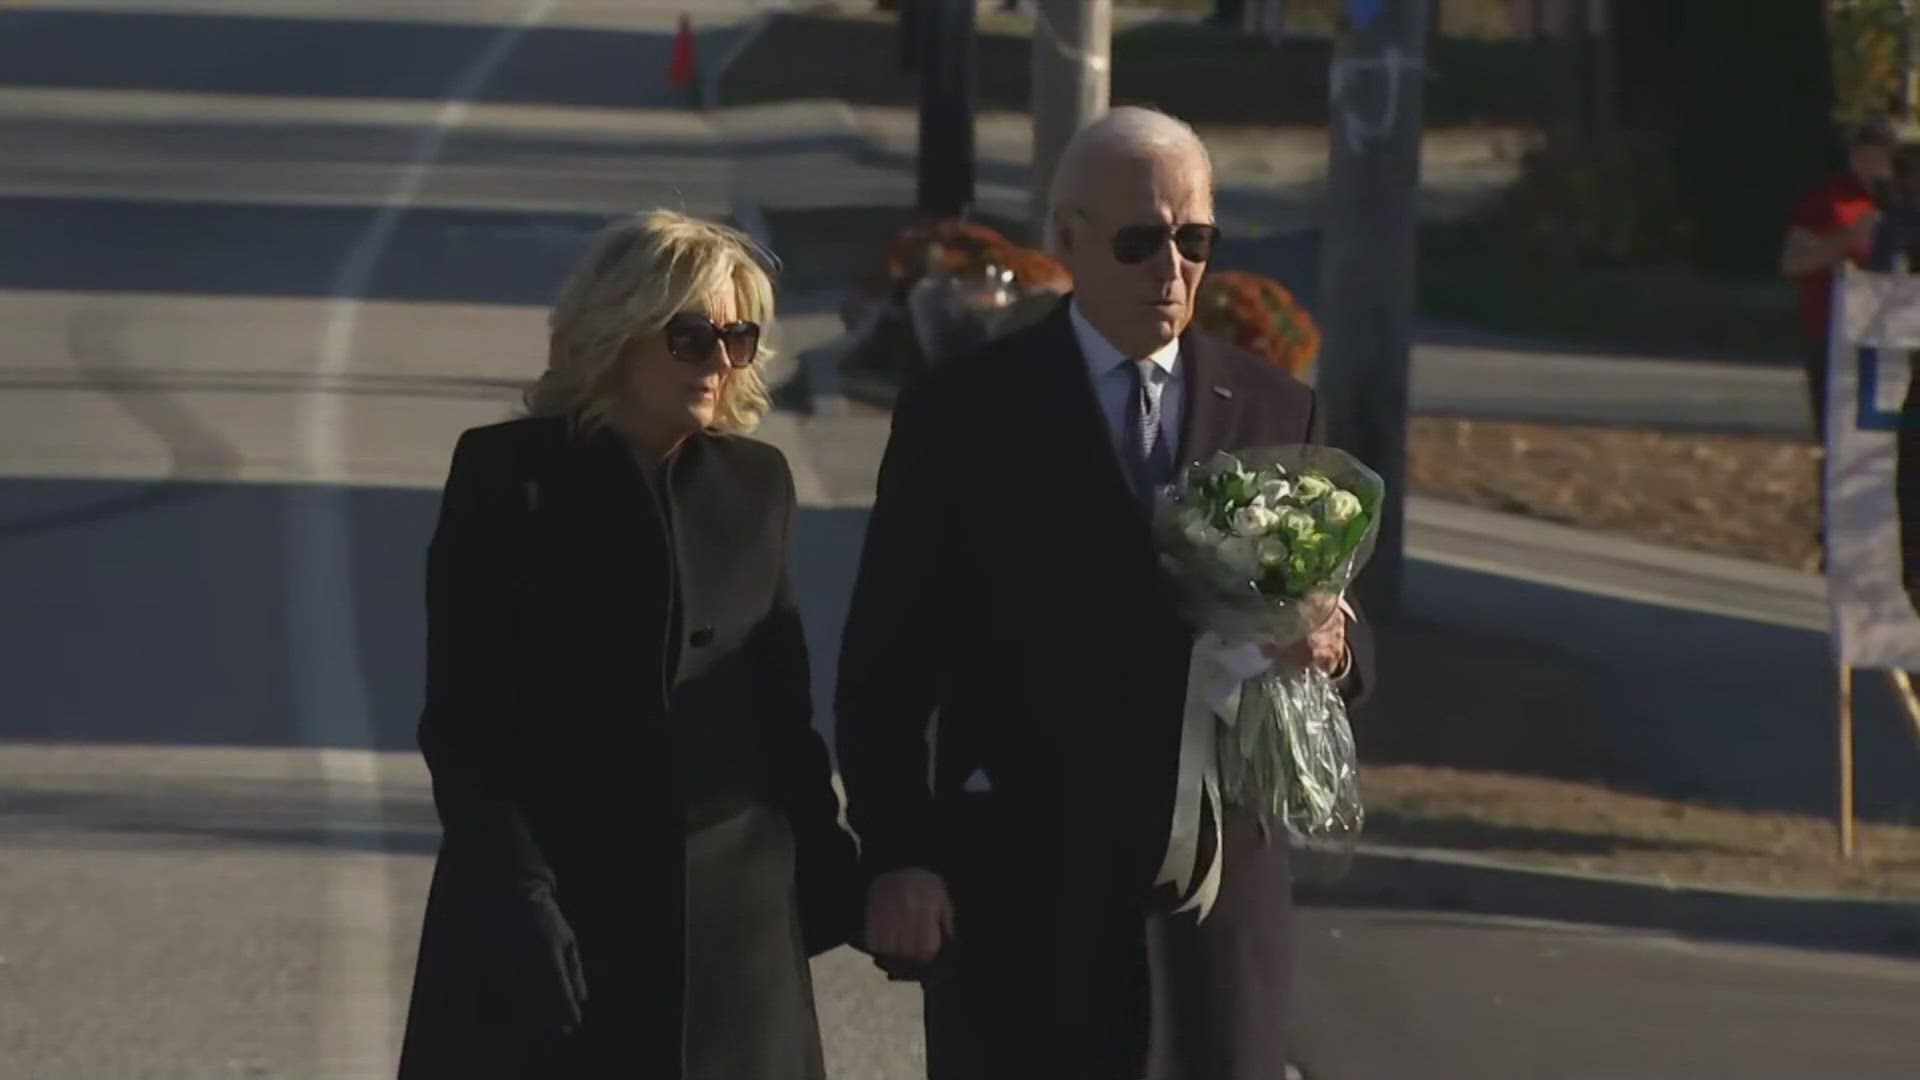 President Joe Biden and First Lady Jill Biden visited Lewiston on Friday to pay respects to the 18 people killed in a mass shooting last week.